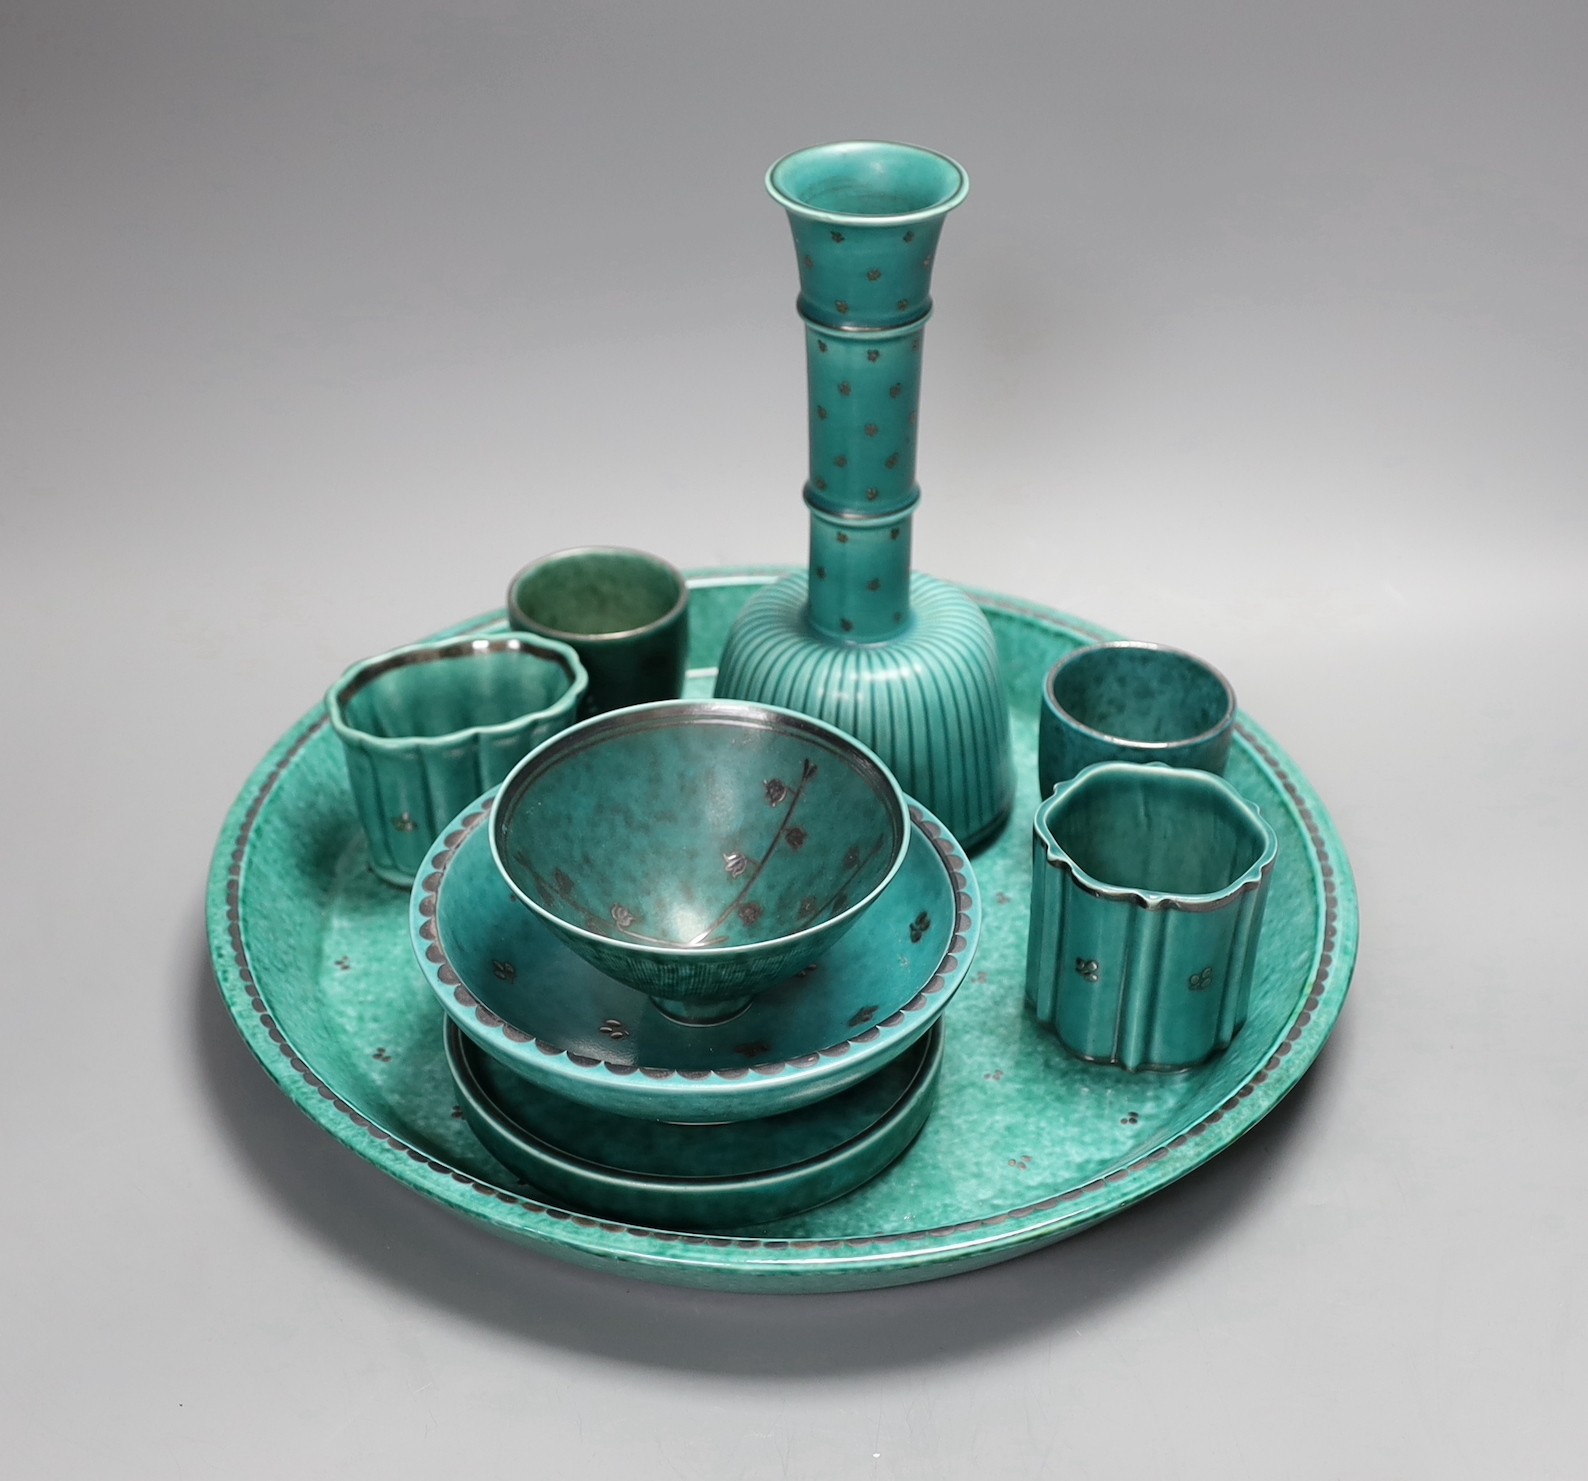 A group of Gustavsberg Wilhelm Kåge design Argenta wares including a tray and two floral decorated pieces; pattern no’s. 960, 1113, 510, A26, A19, 1003, 1094, 1512, 1017